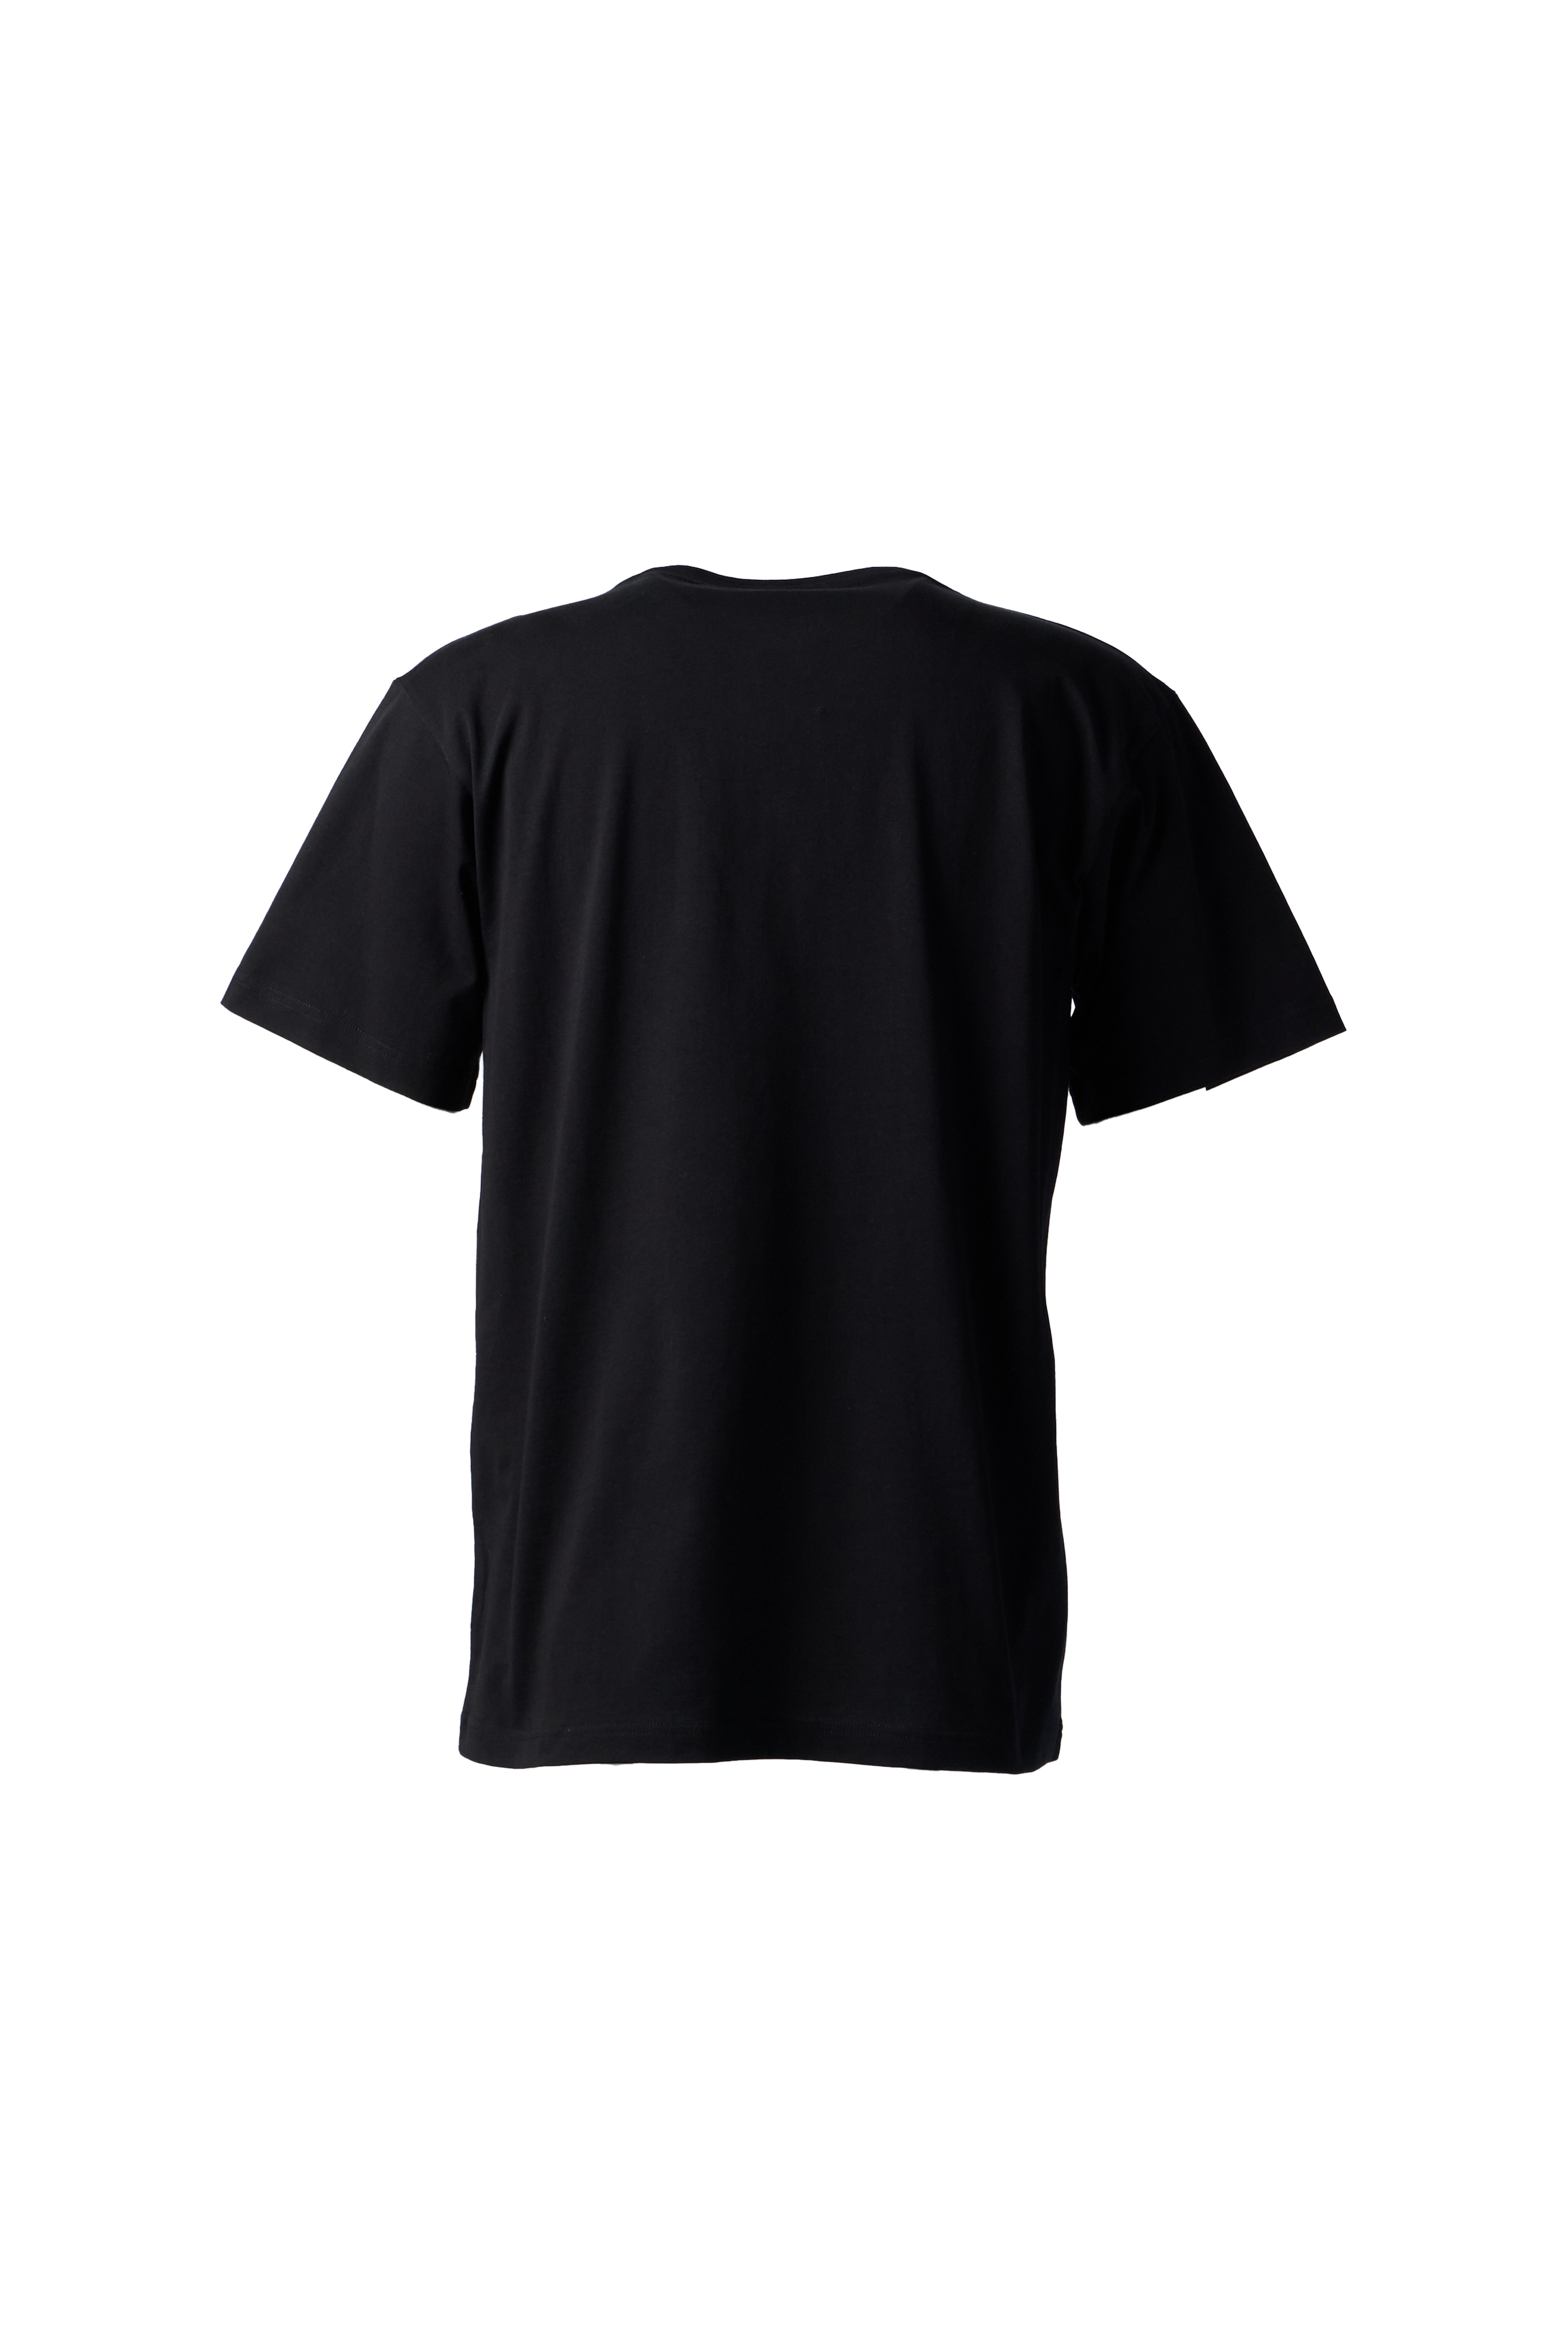 Y/PROJECT - Y Chrome T-Shirt product image